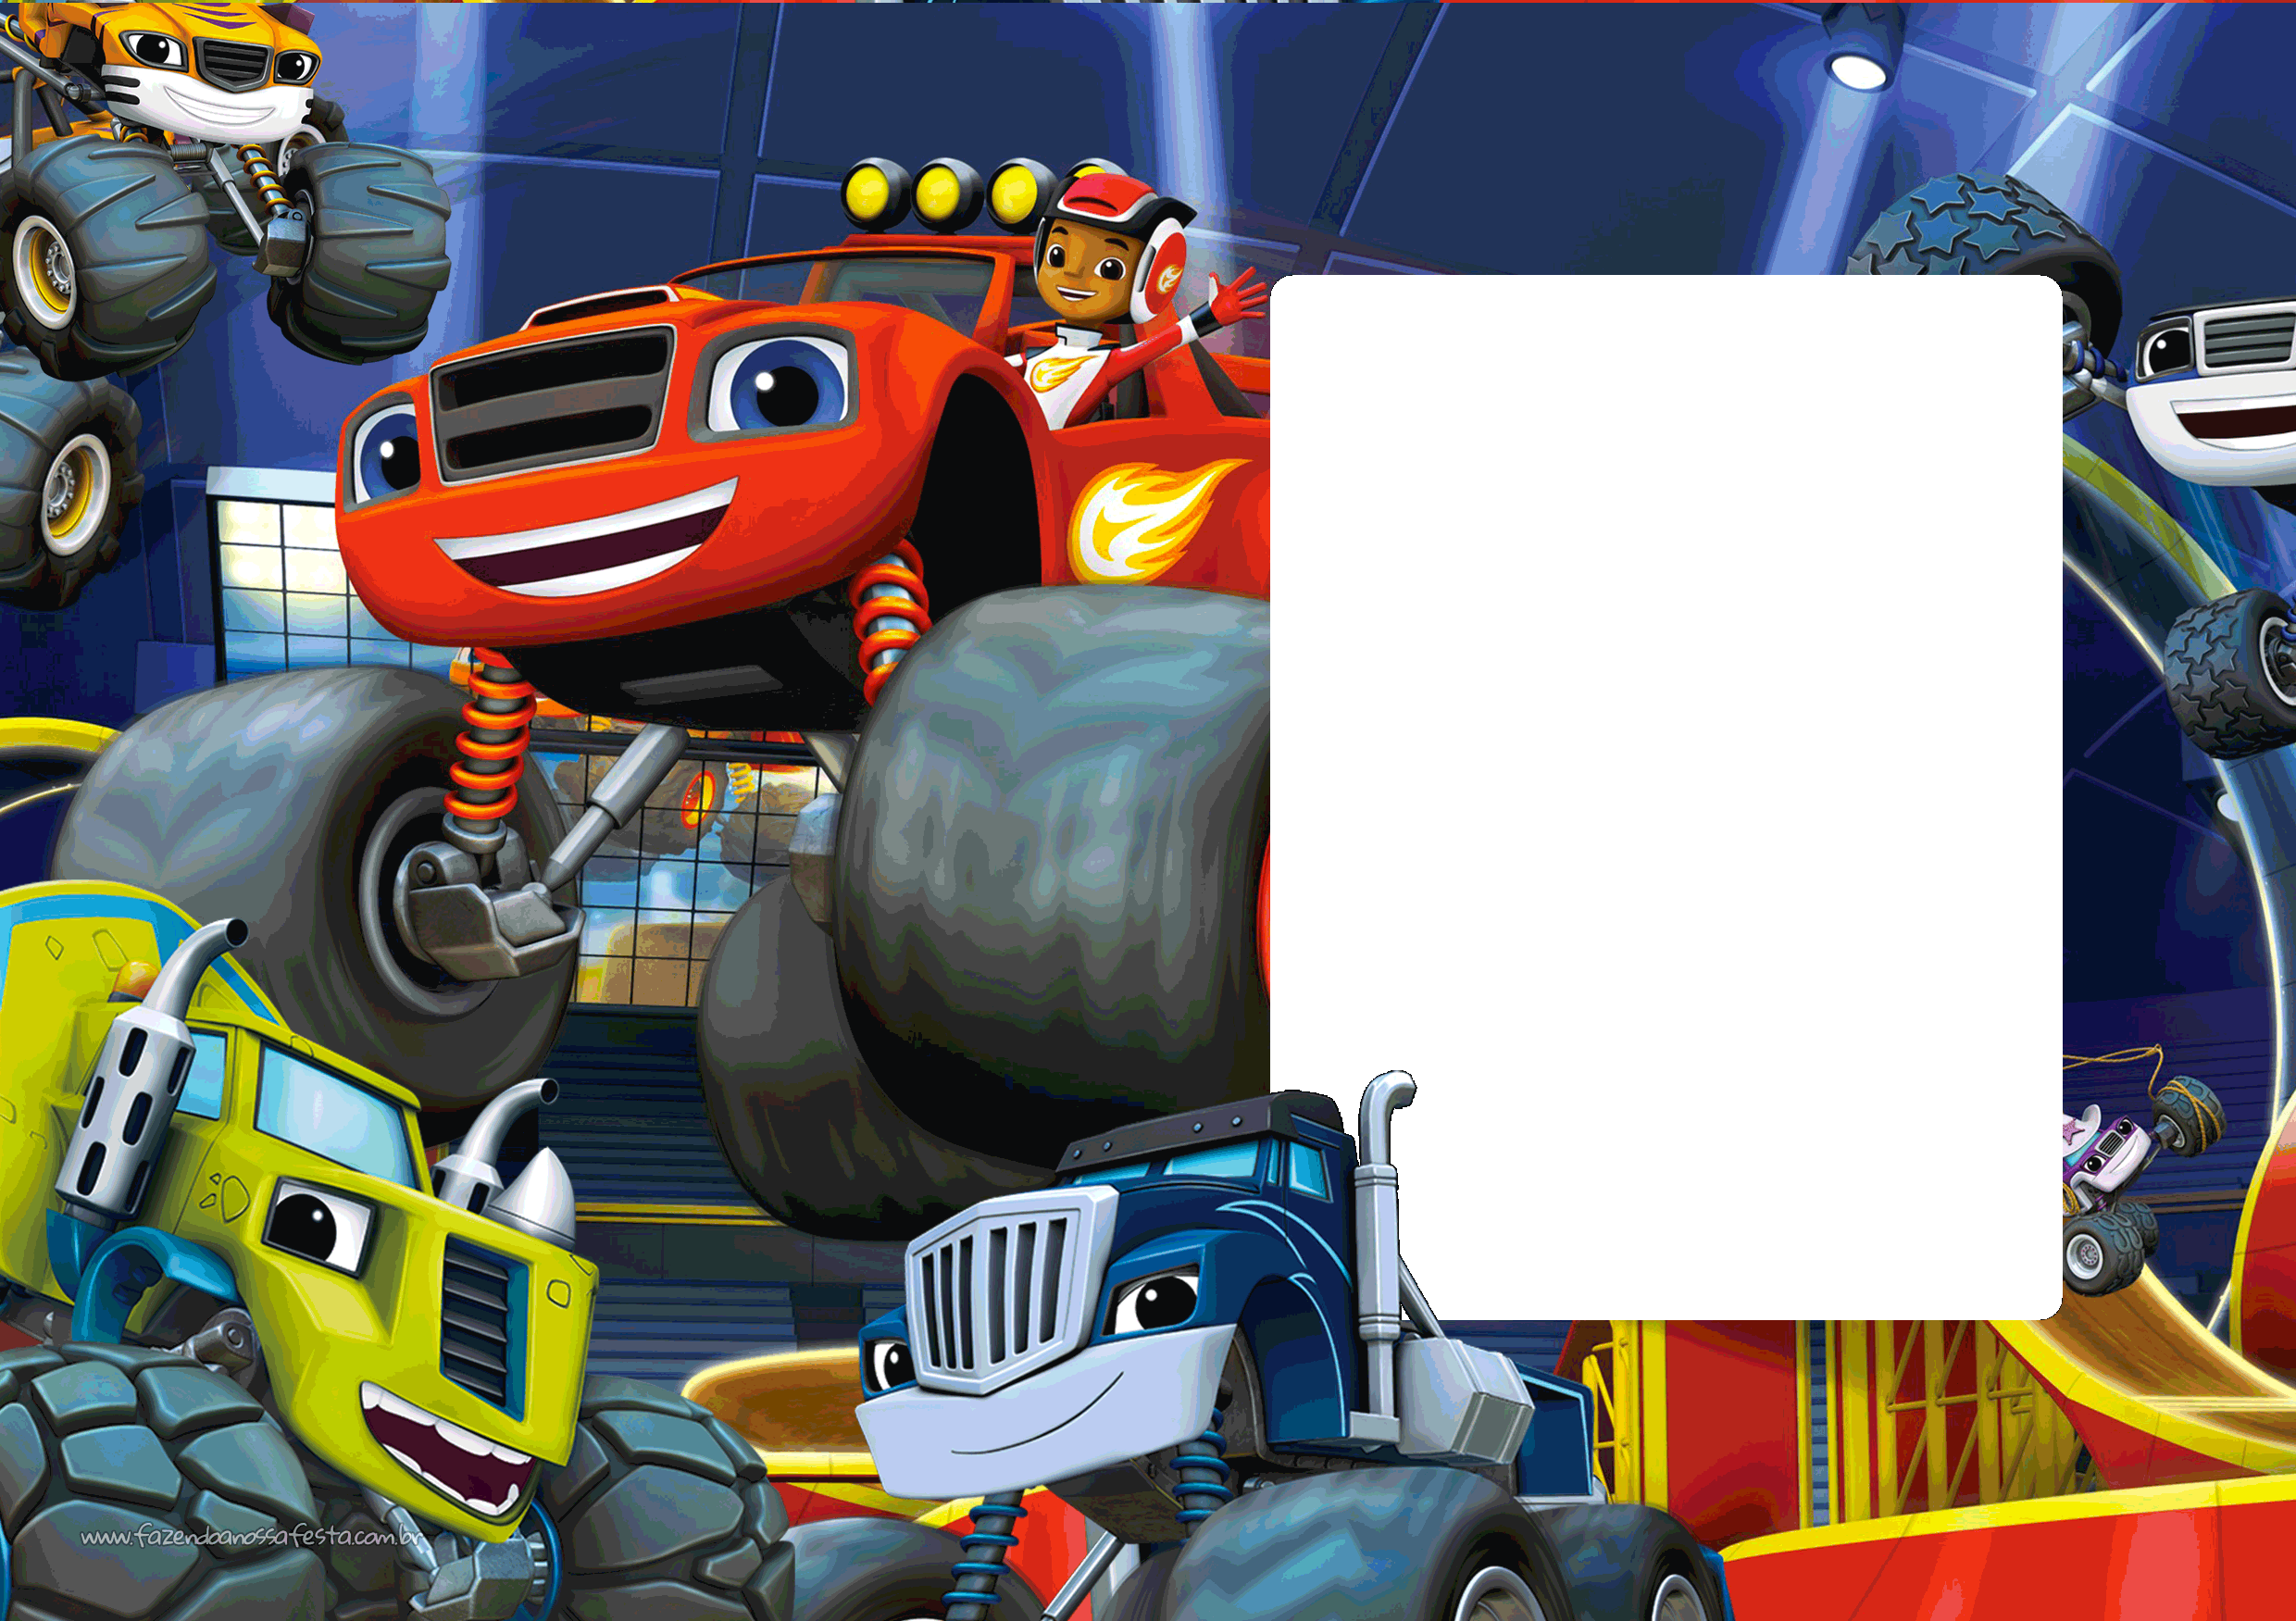 Convite Blaze and the Monster Machines.